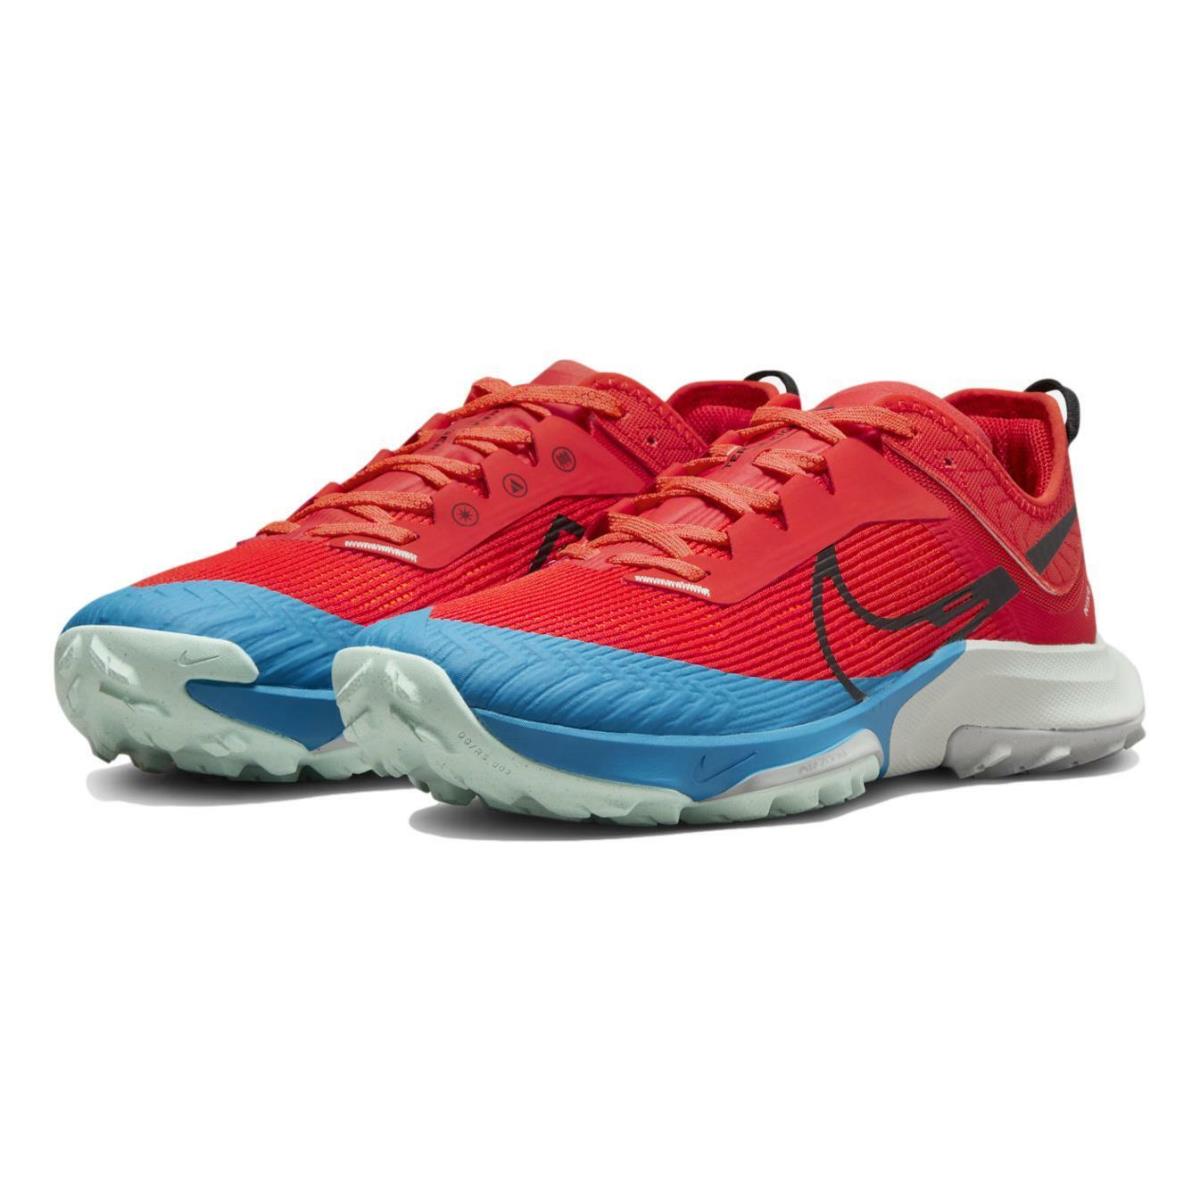 Nike Air Zoom Terra Kiger 8 Men`s Shoes `habanero Red` DH0649-600 - Habanero Red/Black